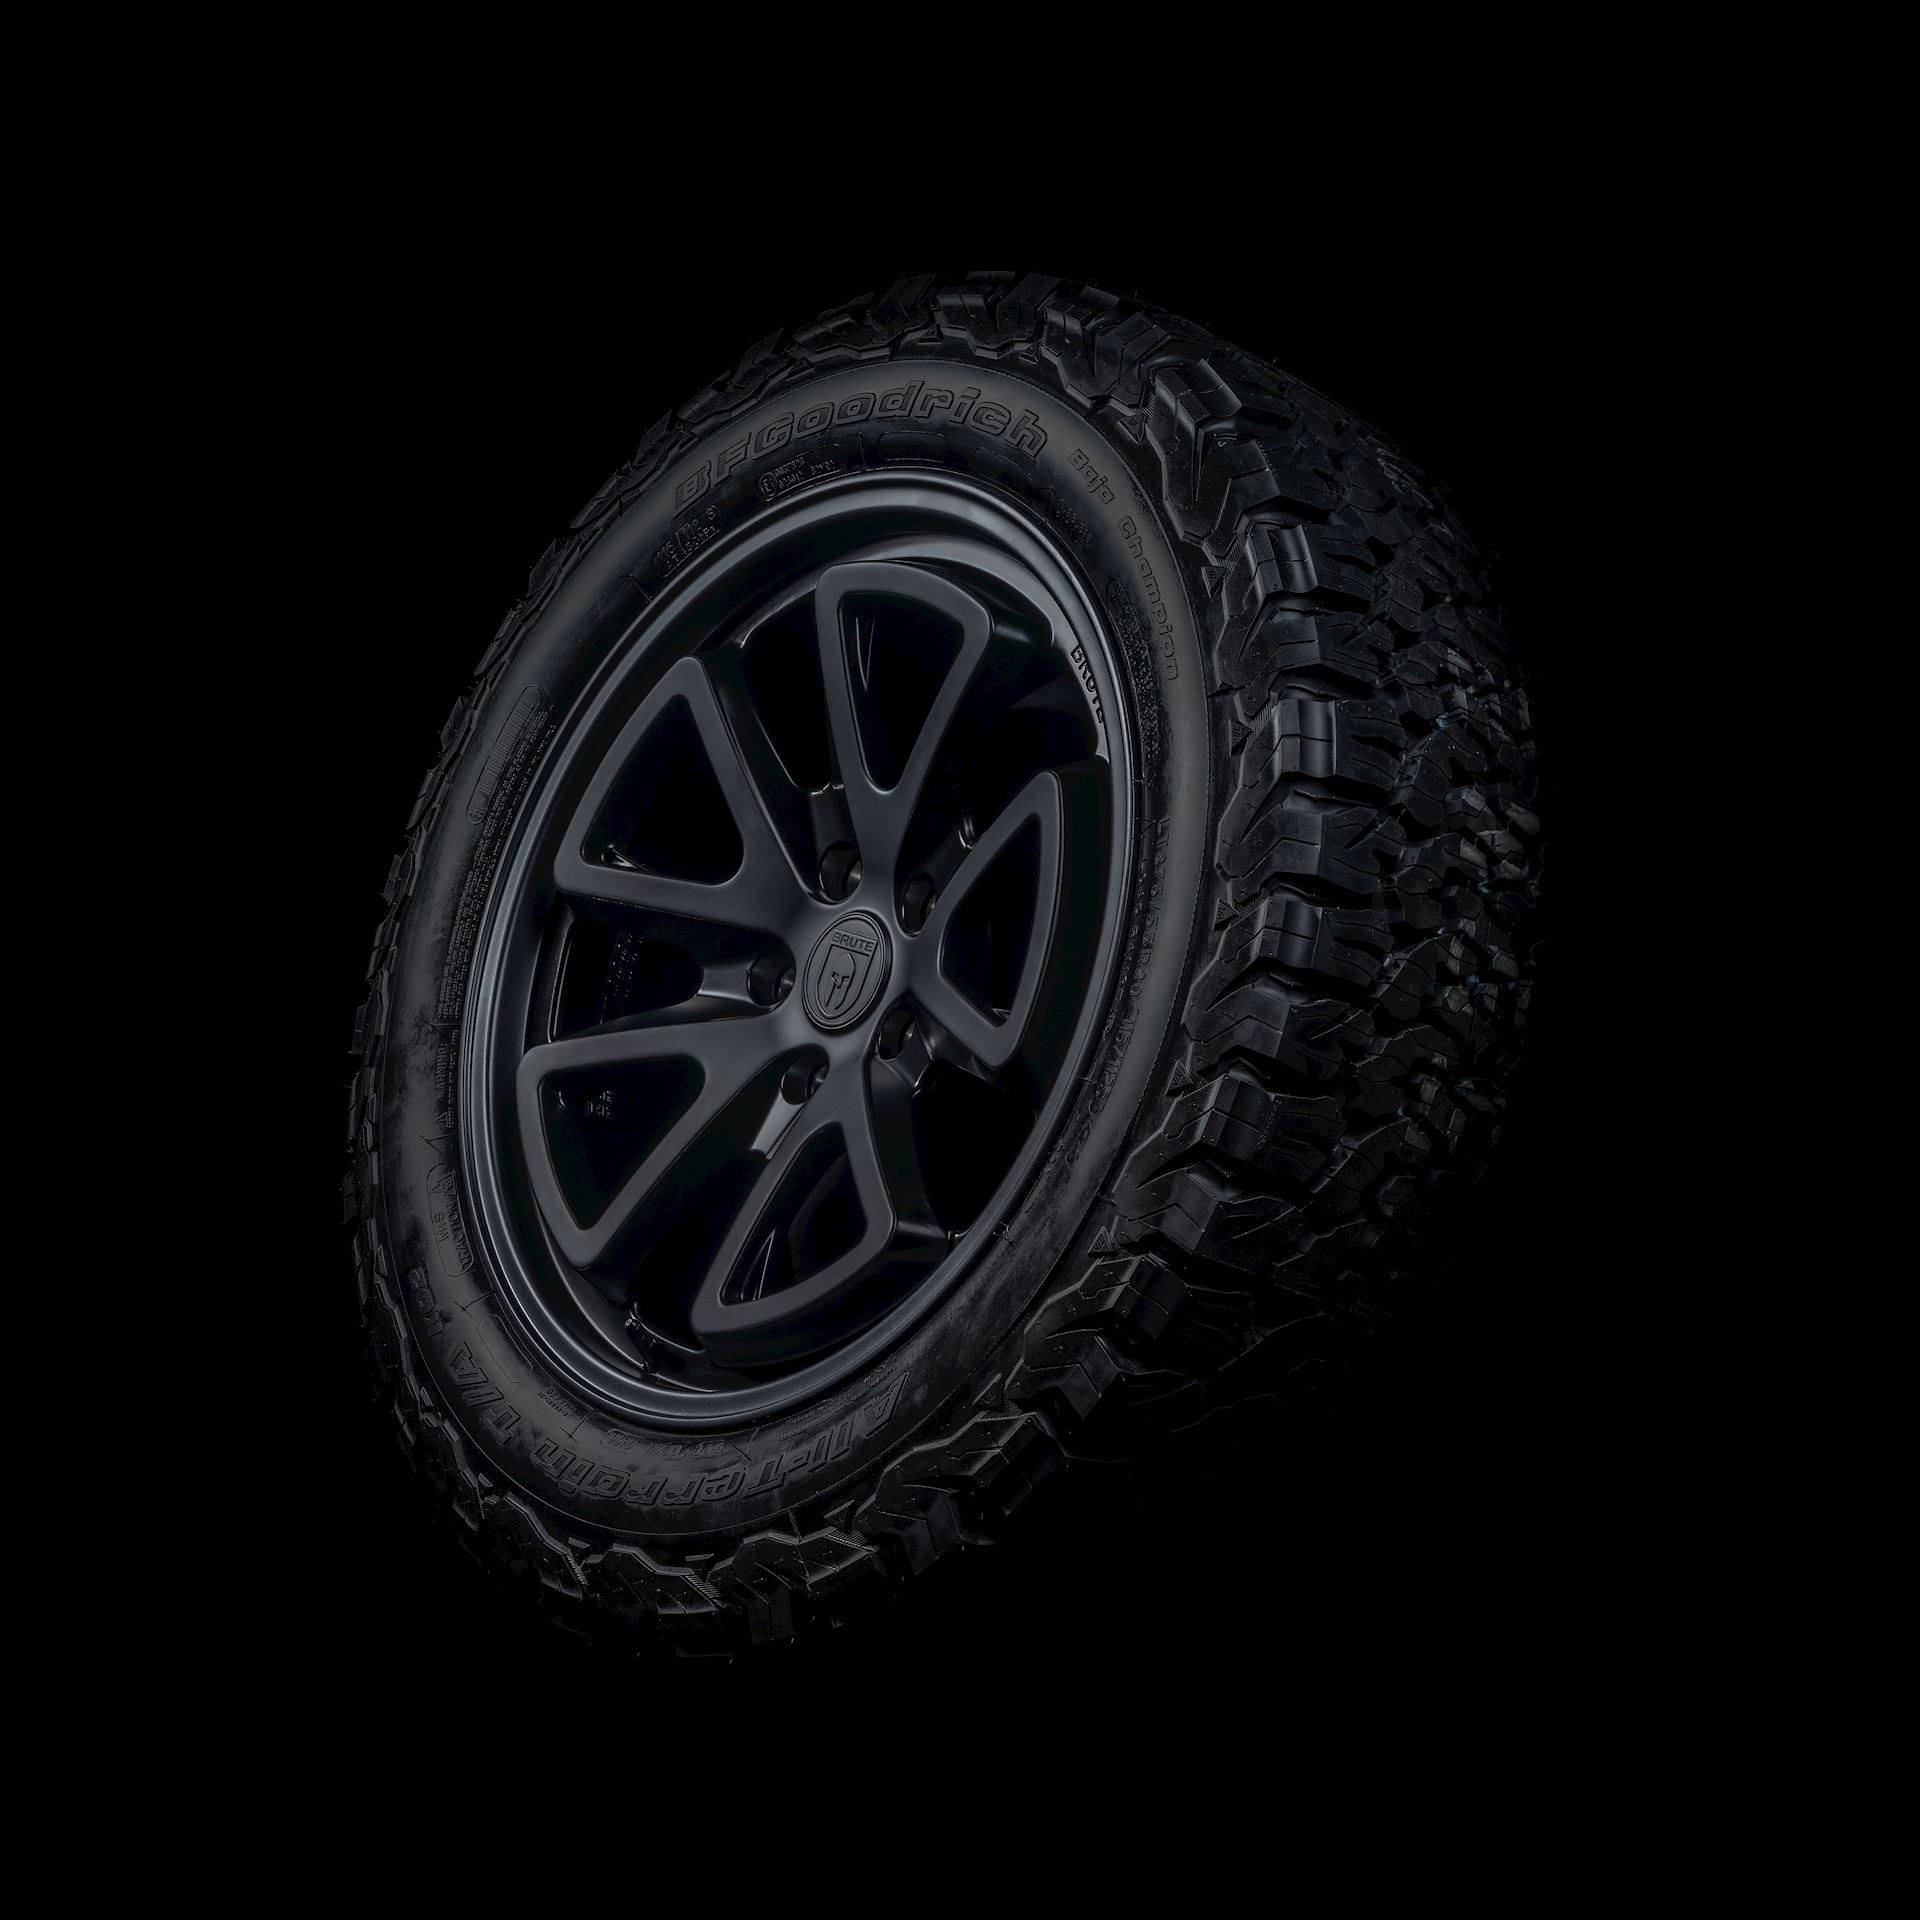 2021_brute_20inch_iconic_wheels-0017